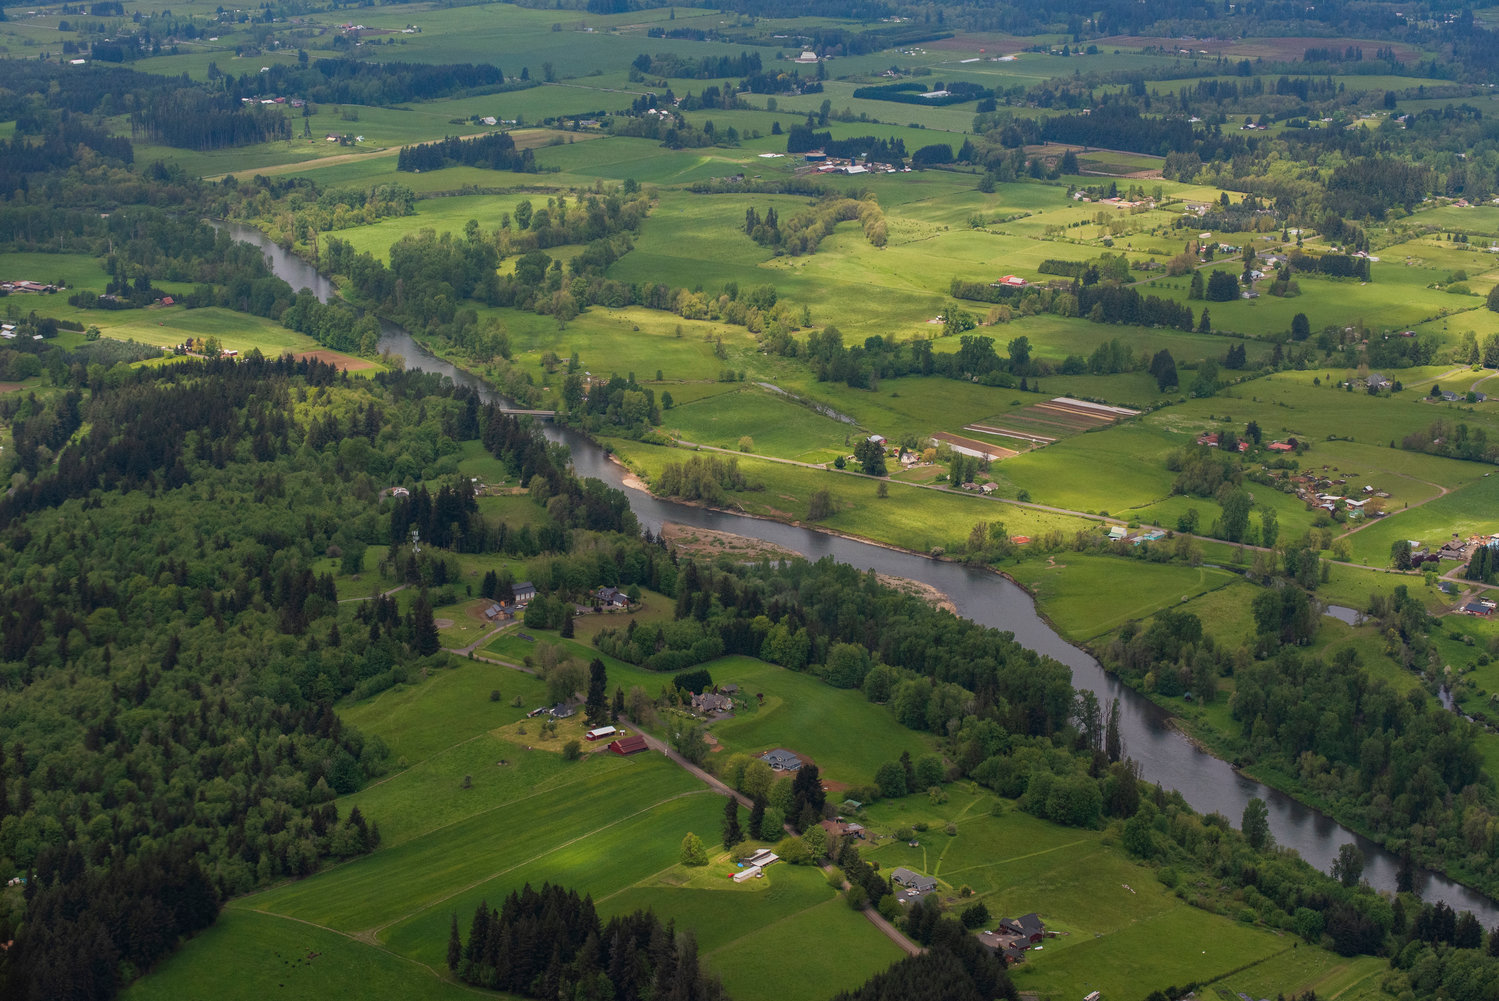 The Chehalis River flows through Independence Valley in Rochester.